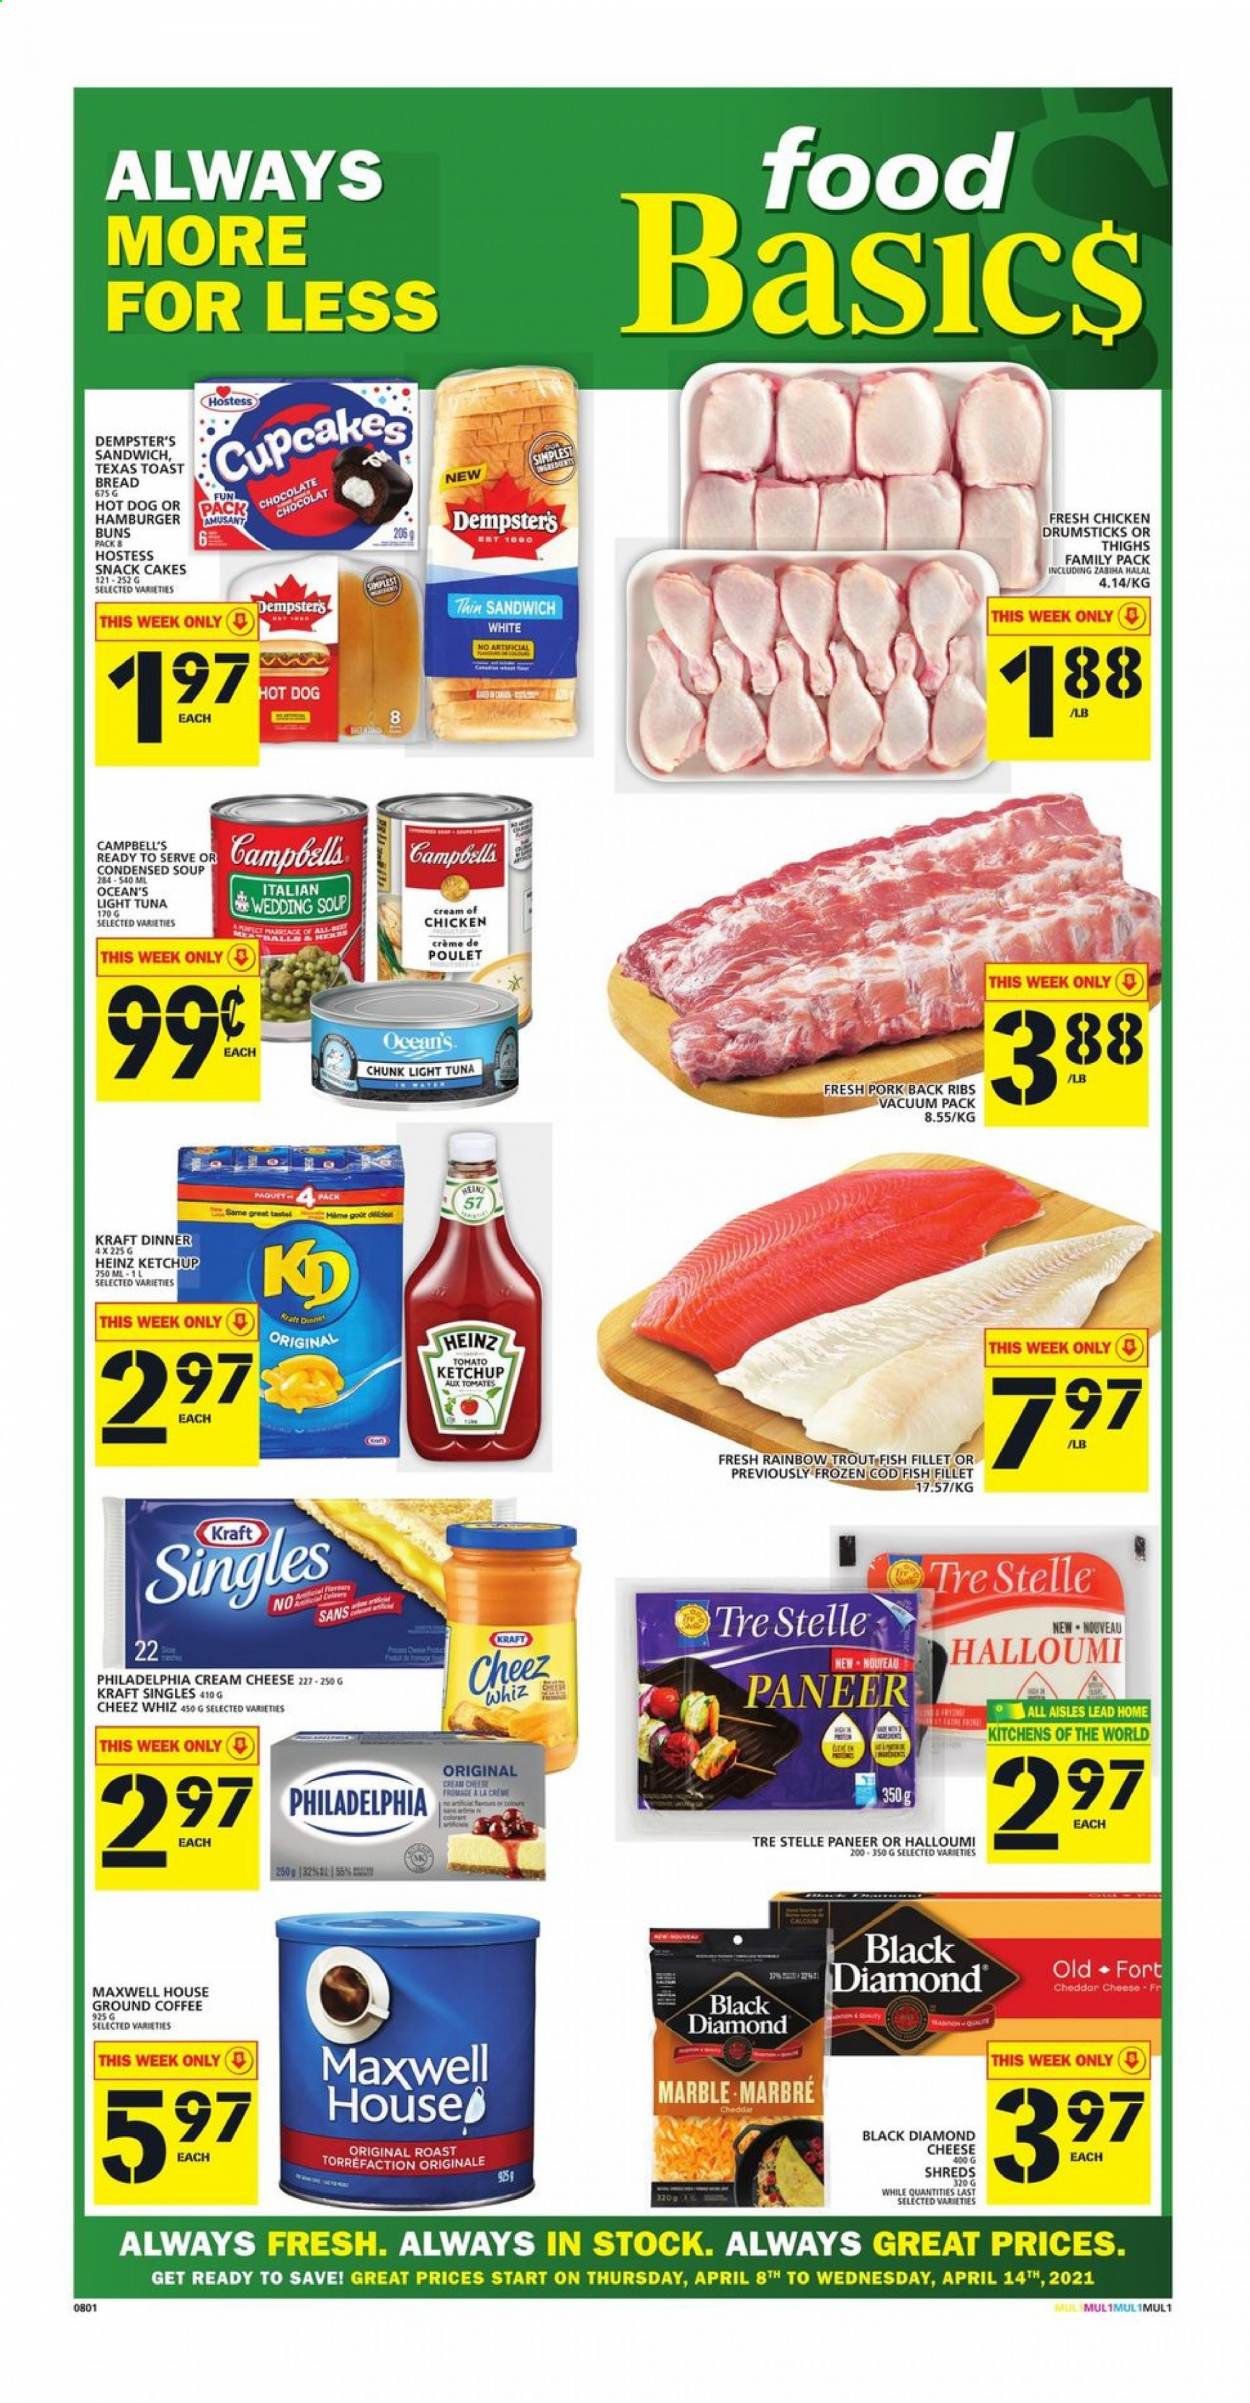 thumbnail - Food Basics Flyer - April 08, 2021 - April 14, 2021 - Sales products - bread, hot dog rolls, buns, burger buns, toast bread, cupcake, cod, fish fillets, trout, tuna, fish, Campbell's, sandwich, condensed soup, Kraft®, ready meal, cheese spread, cream cheese, sandwich slices, halloumi, cheddar, paneer, cheese, Kraft Singles, grilling cheese, chocolate, snack cake, canned tuna, light tuna, canned fish, ketchup, Maxwell House, coffee, ground coffee, chicken thighs, chicken drumsticks, chicken, ribs, pork meat, pork ribs, pork back ribs, Heinz, Philadelphia. Page 1.